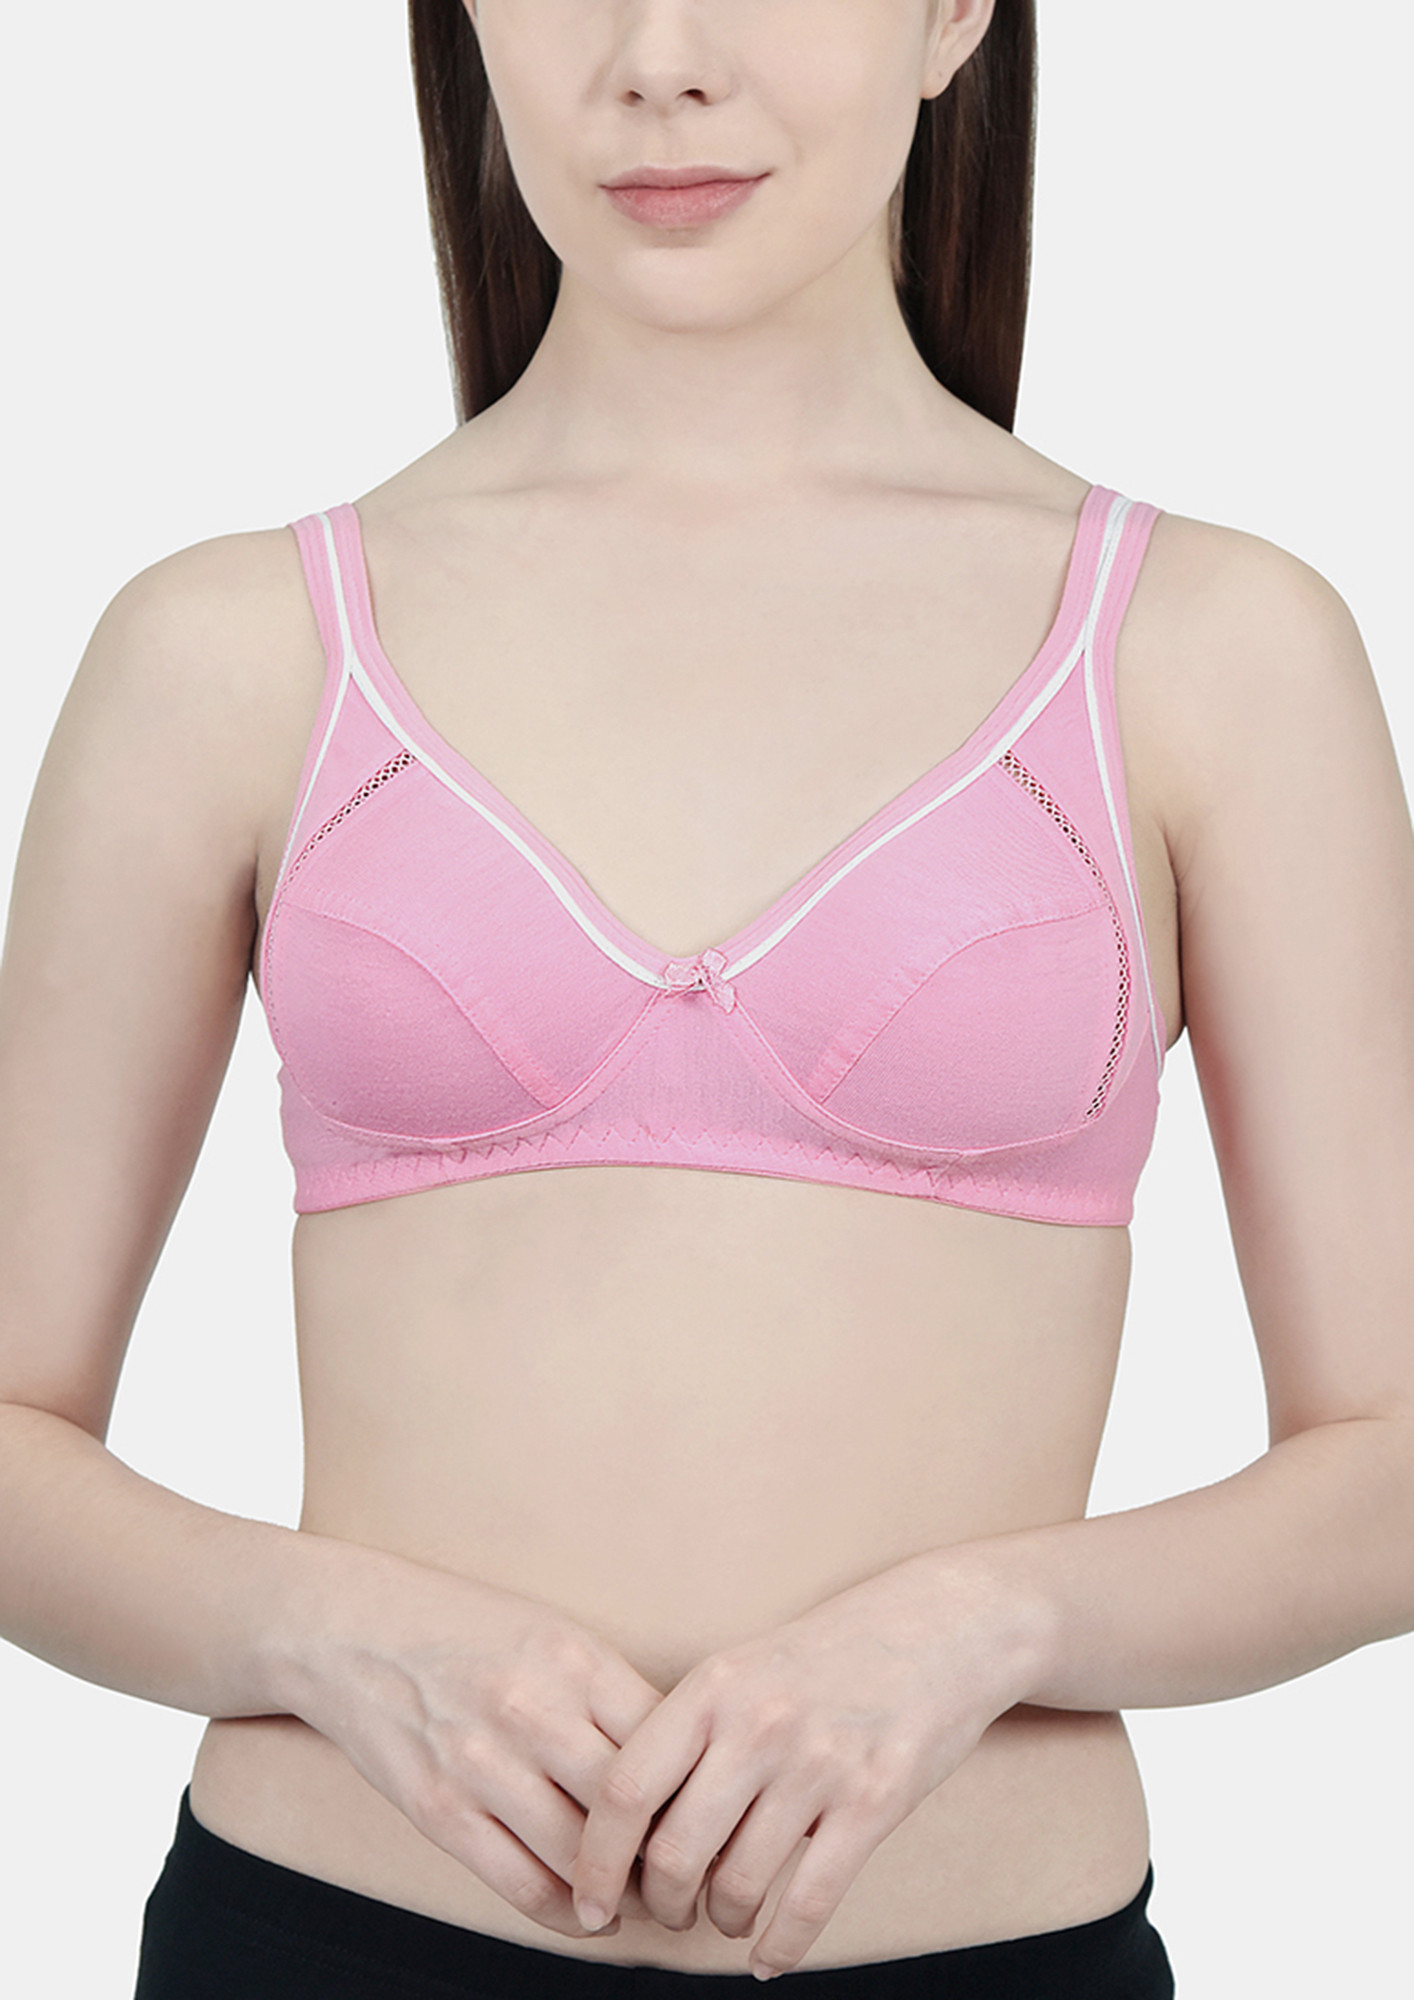 ABSTRACT TOUCH PINK NON WIRED NON PADDED BRA